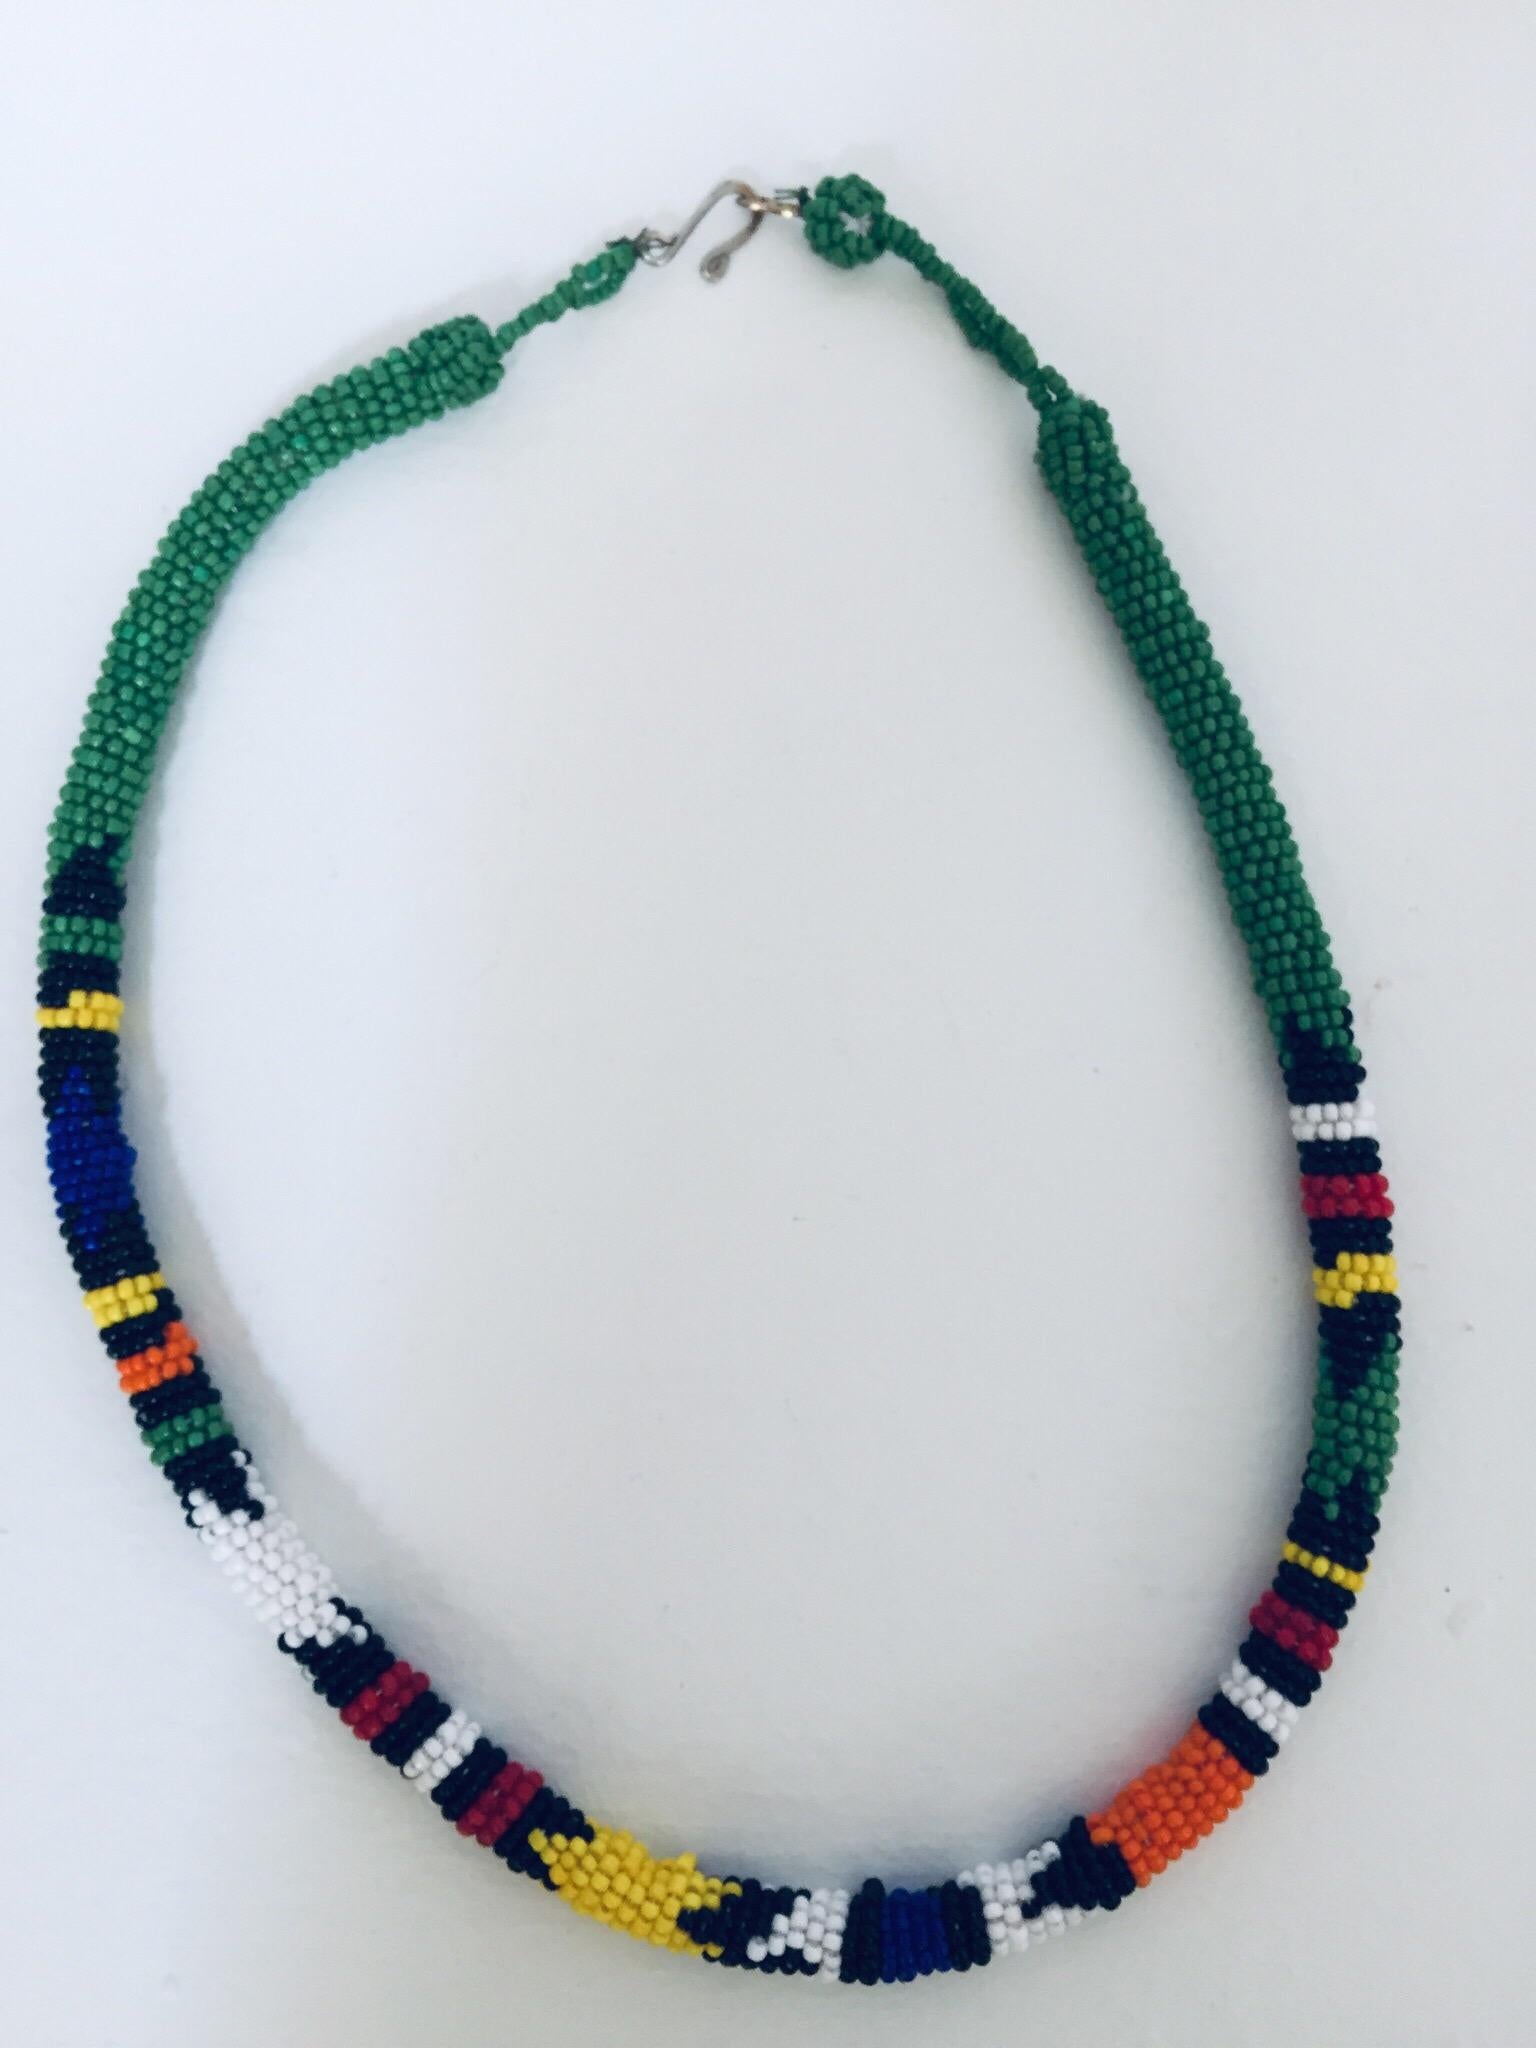 Hand-Crafted Vintage African Urembo Beaded Necklace Choker by the Maasai Tribe Kenya